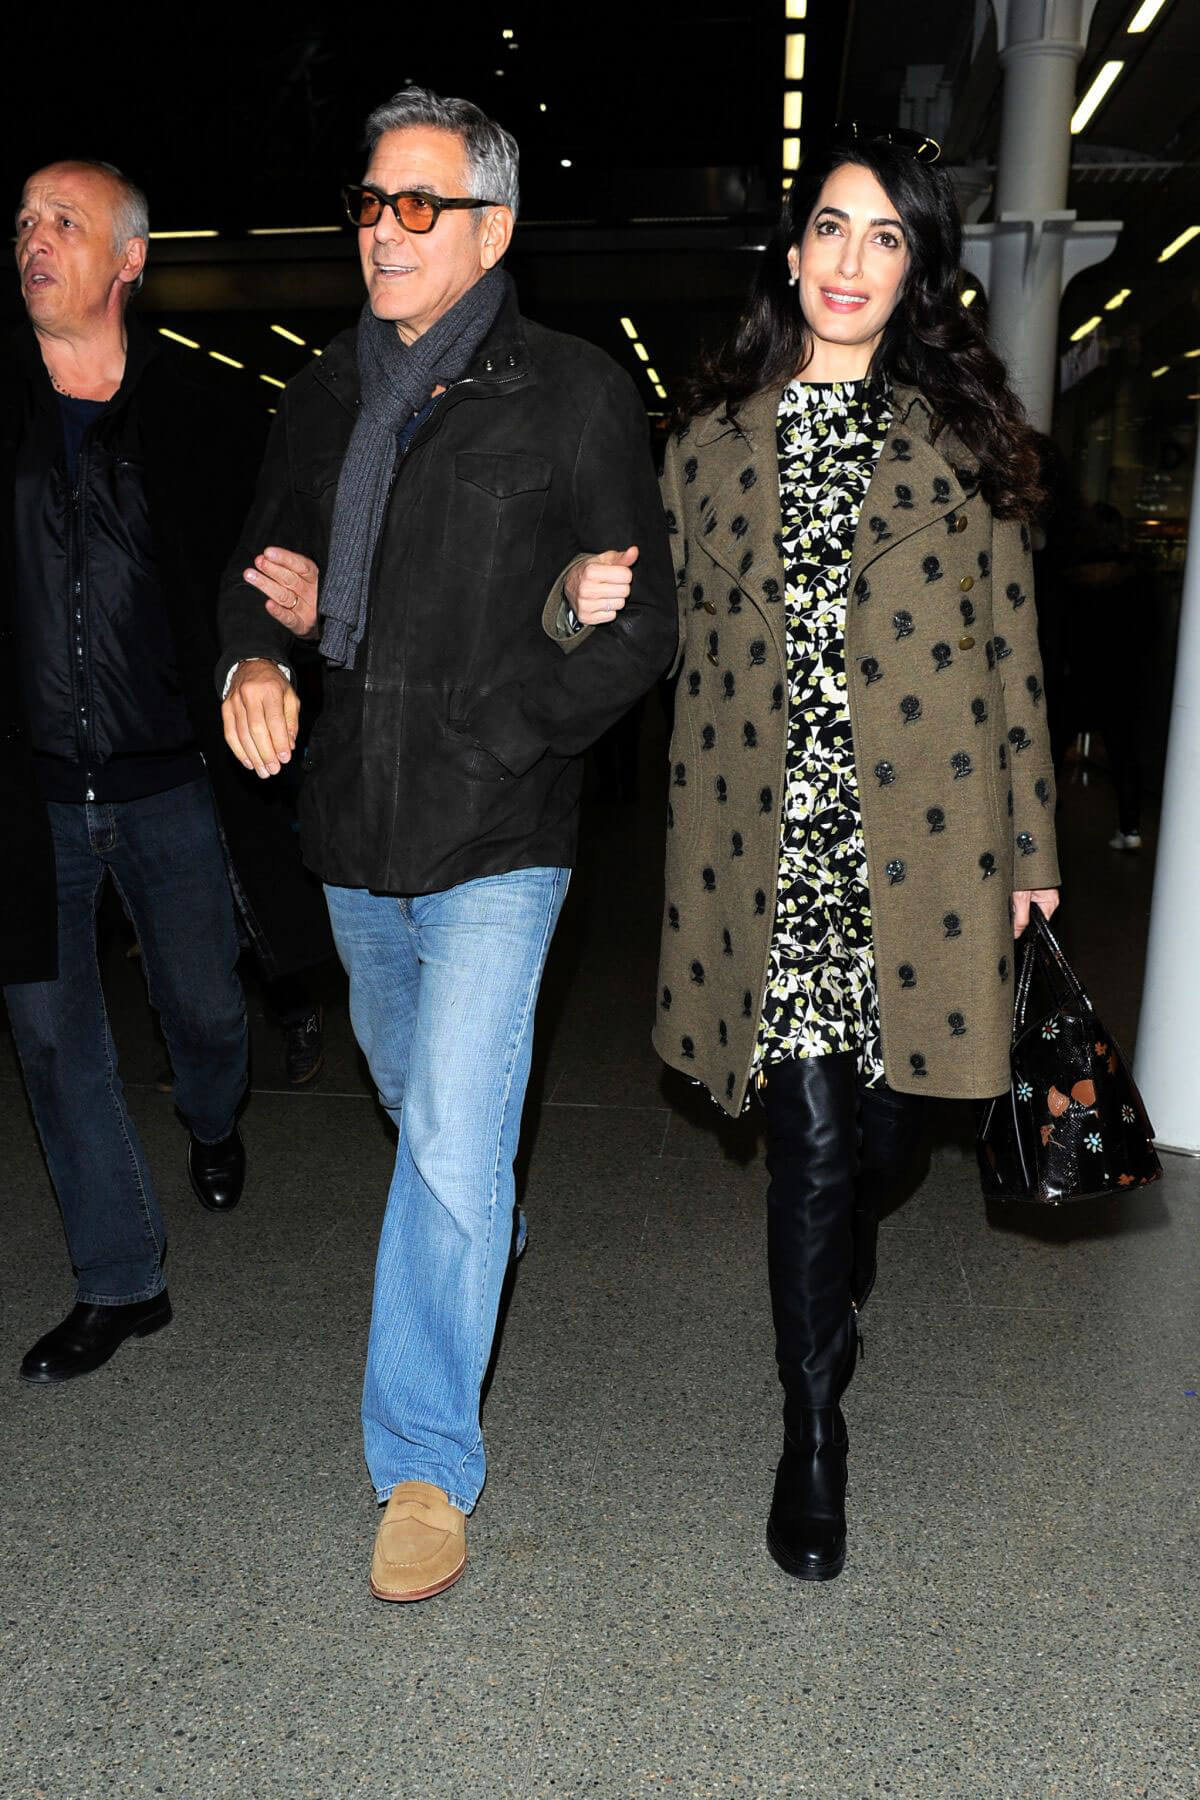 Amal Clooney and George Clooney at St Pancras Eurostar in London 9